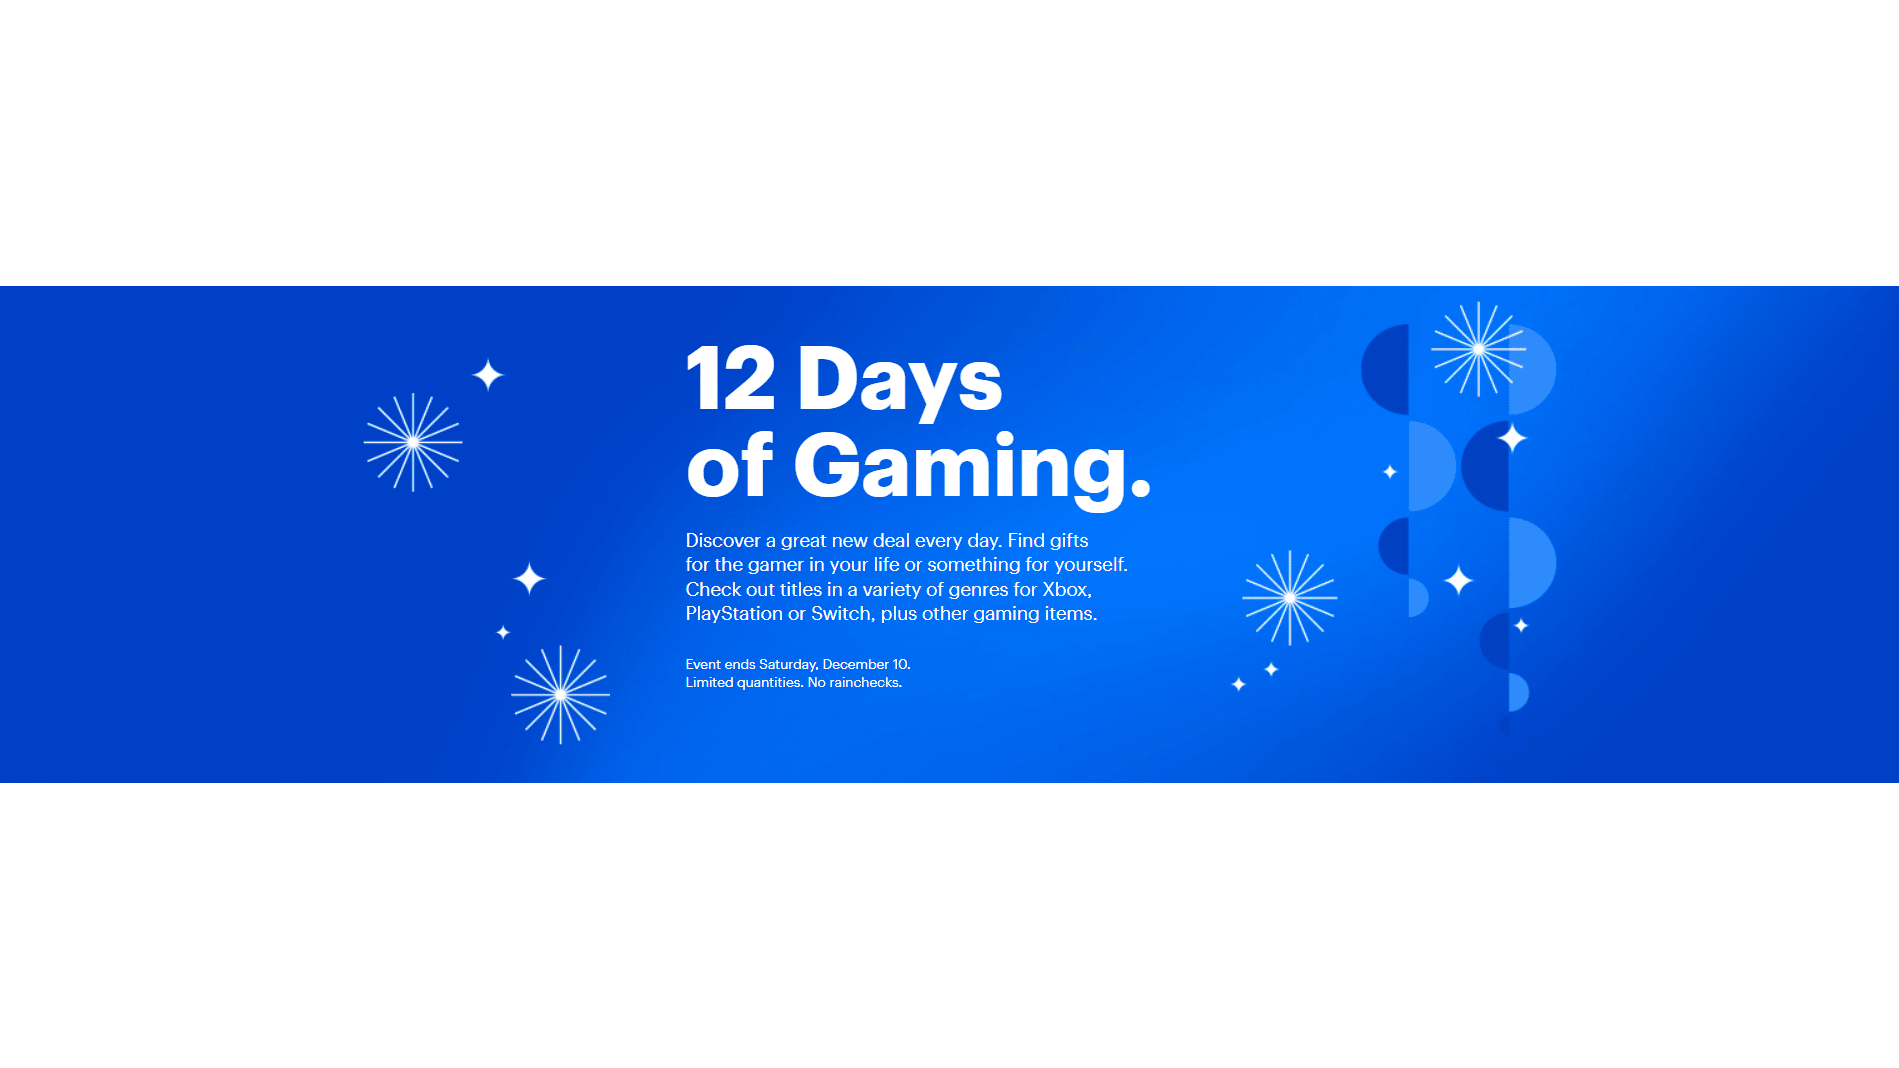 Best Buy's 12 Days of Gaming event starts now!